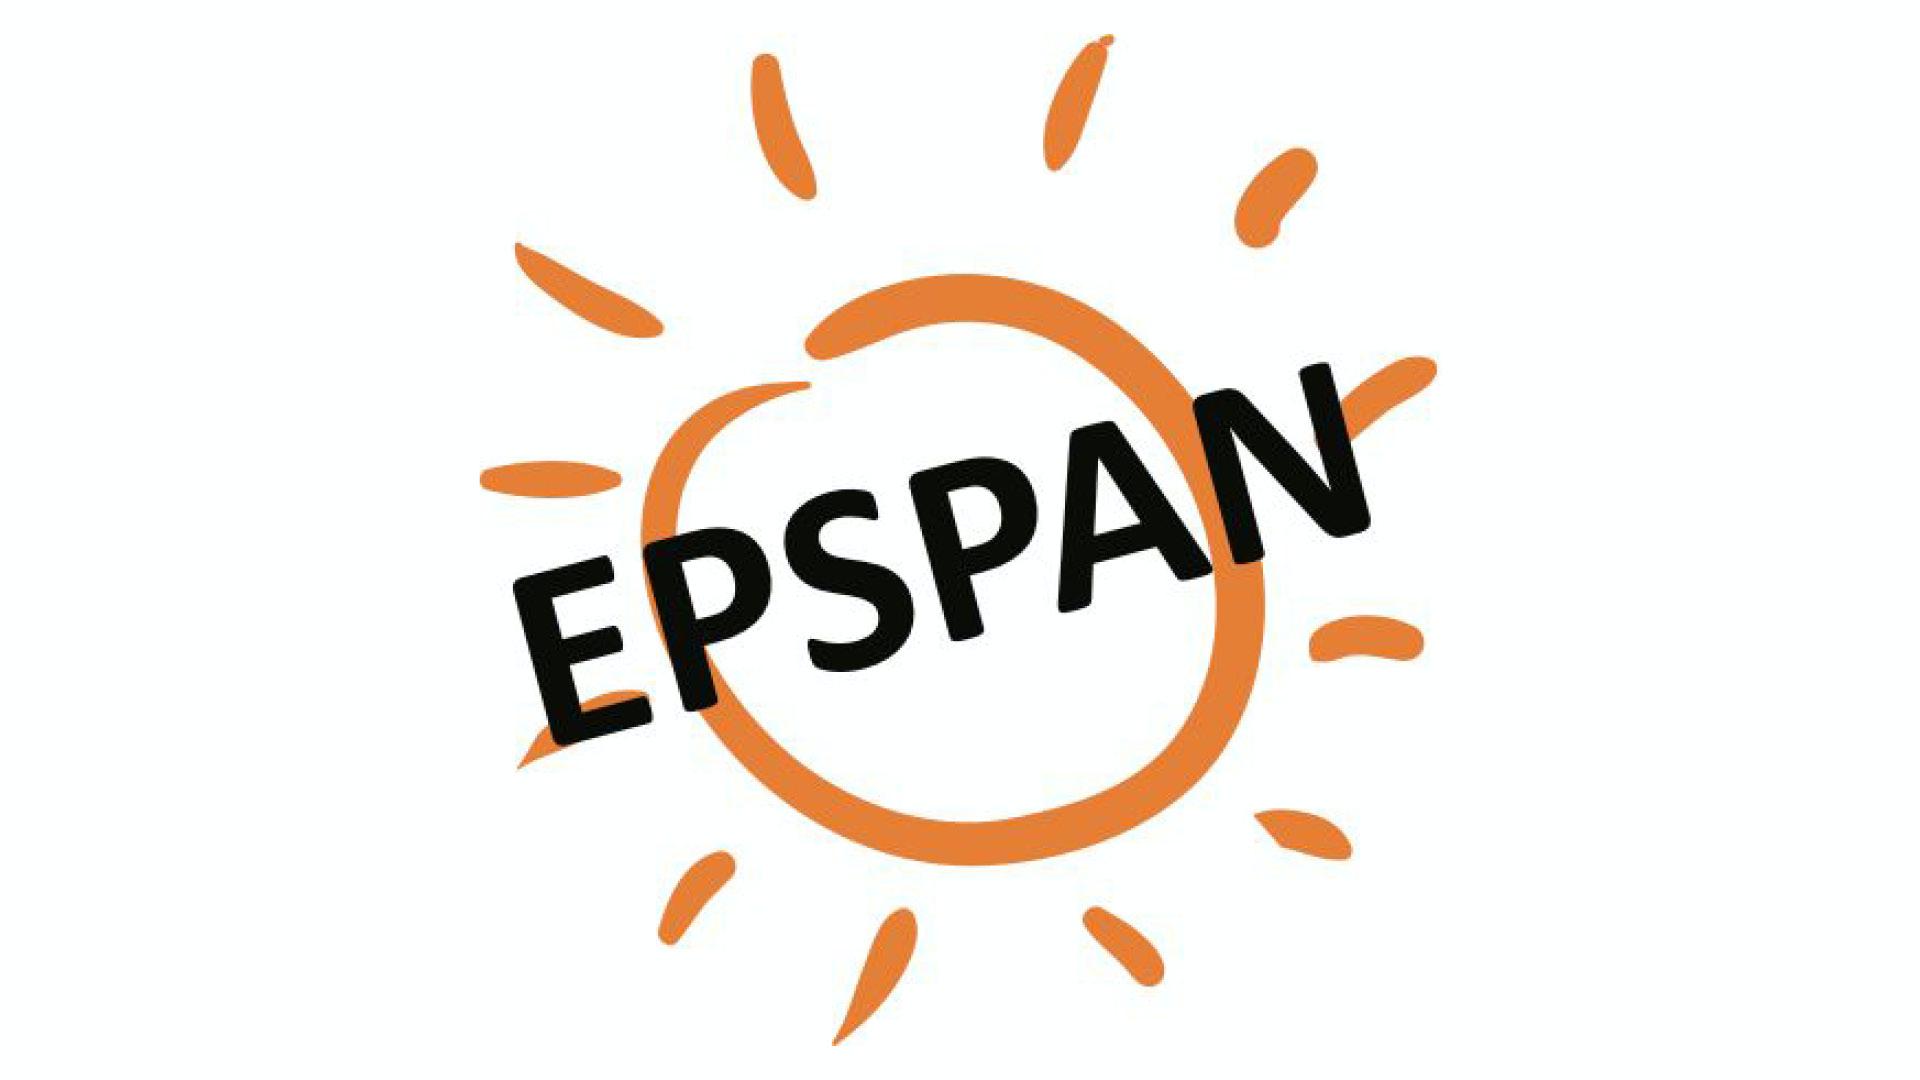 EPSPAN- Well-being Requires Improved Medicare for All